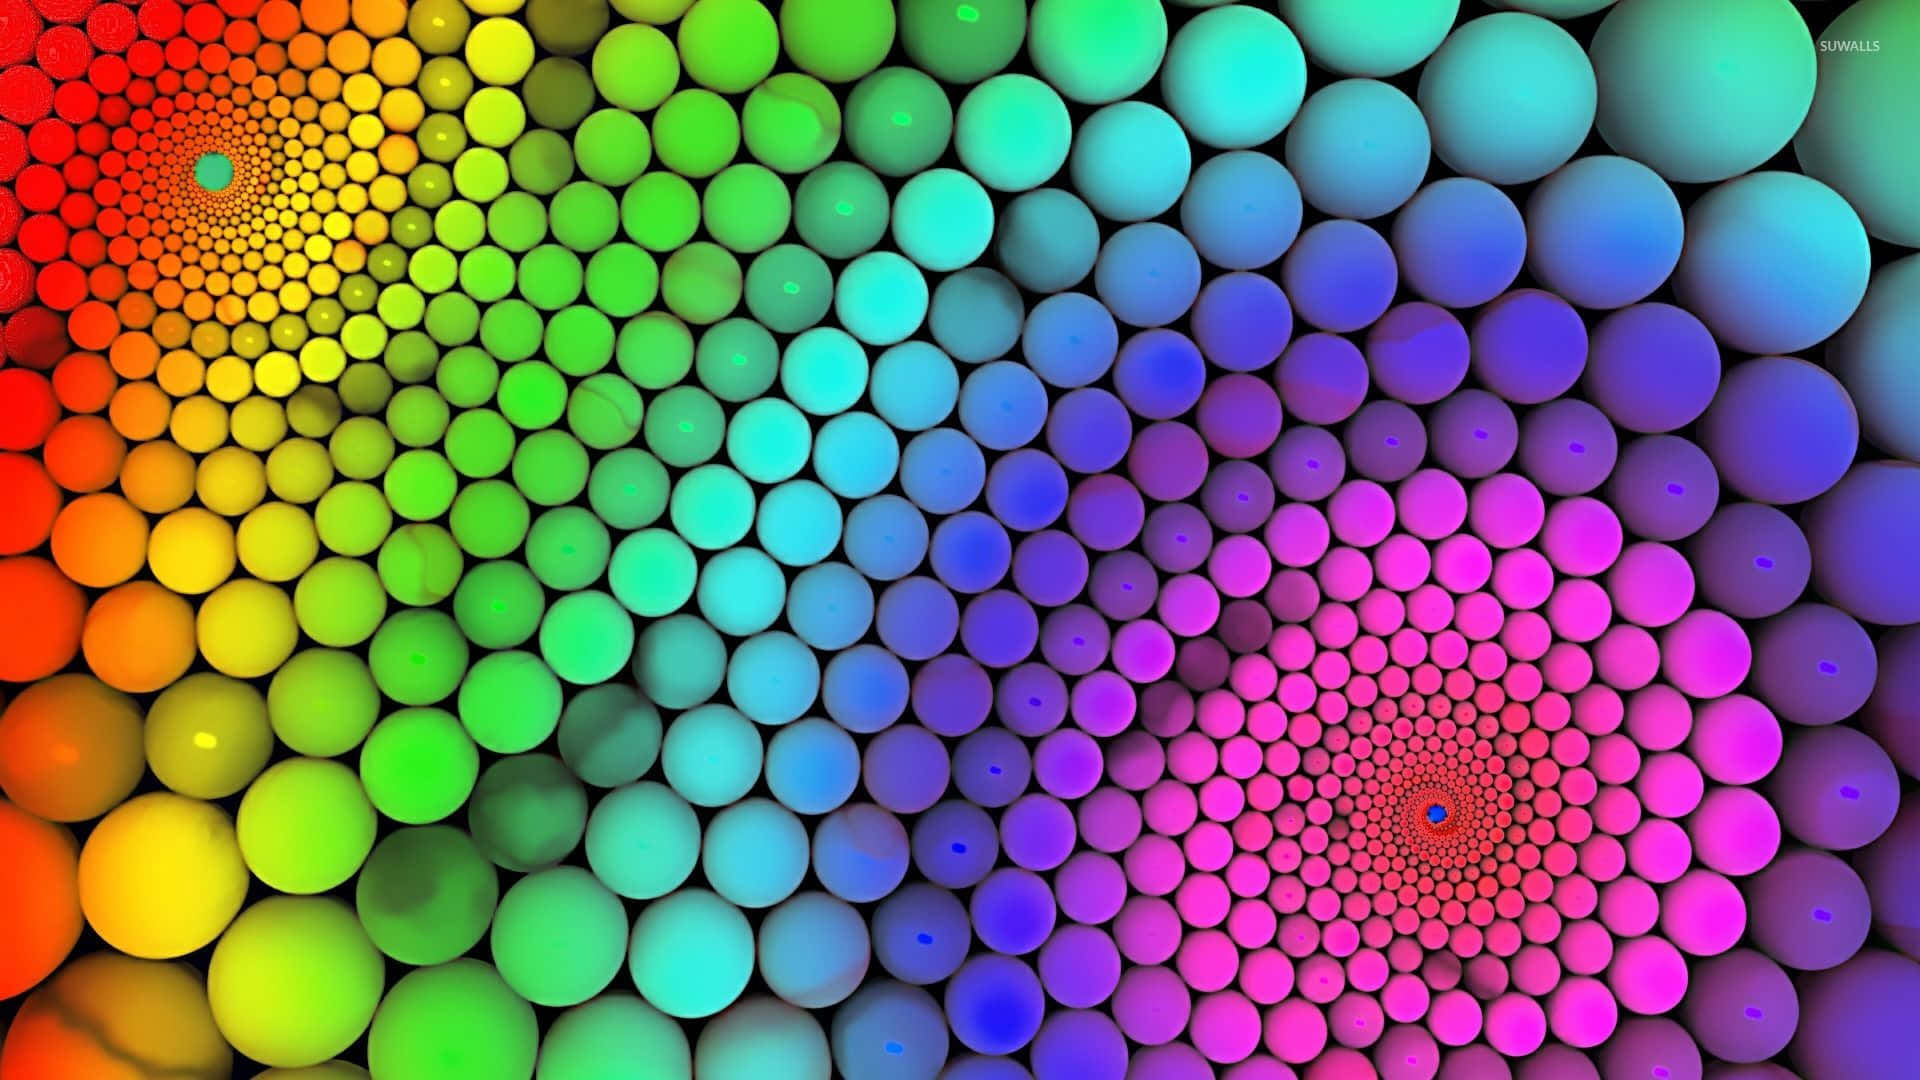 A vibrant and mesmerizing illusion of colors and patterns